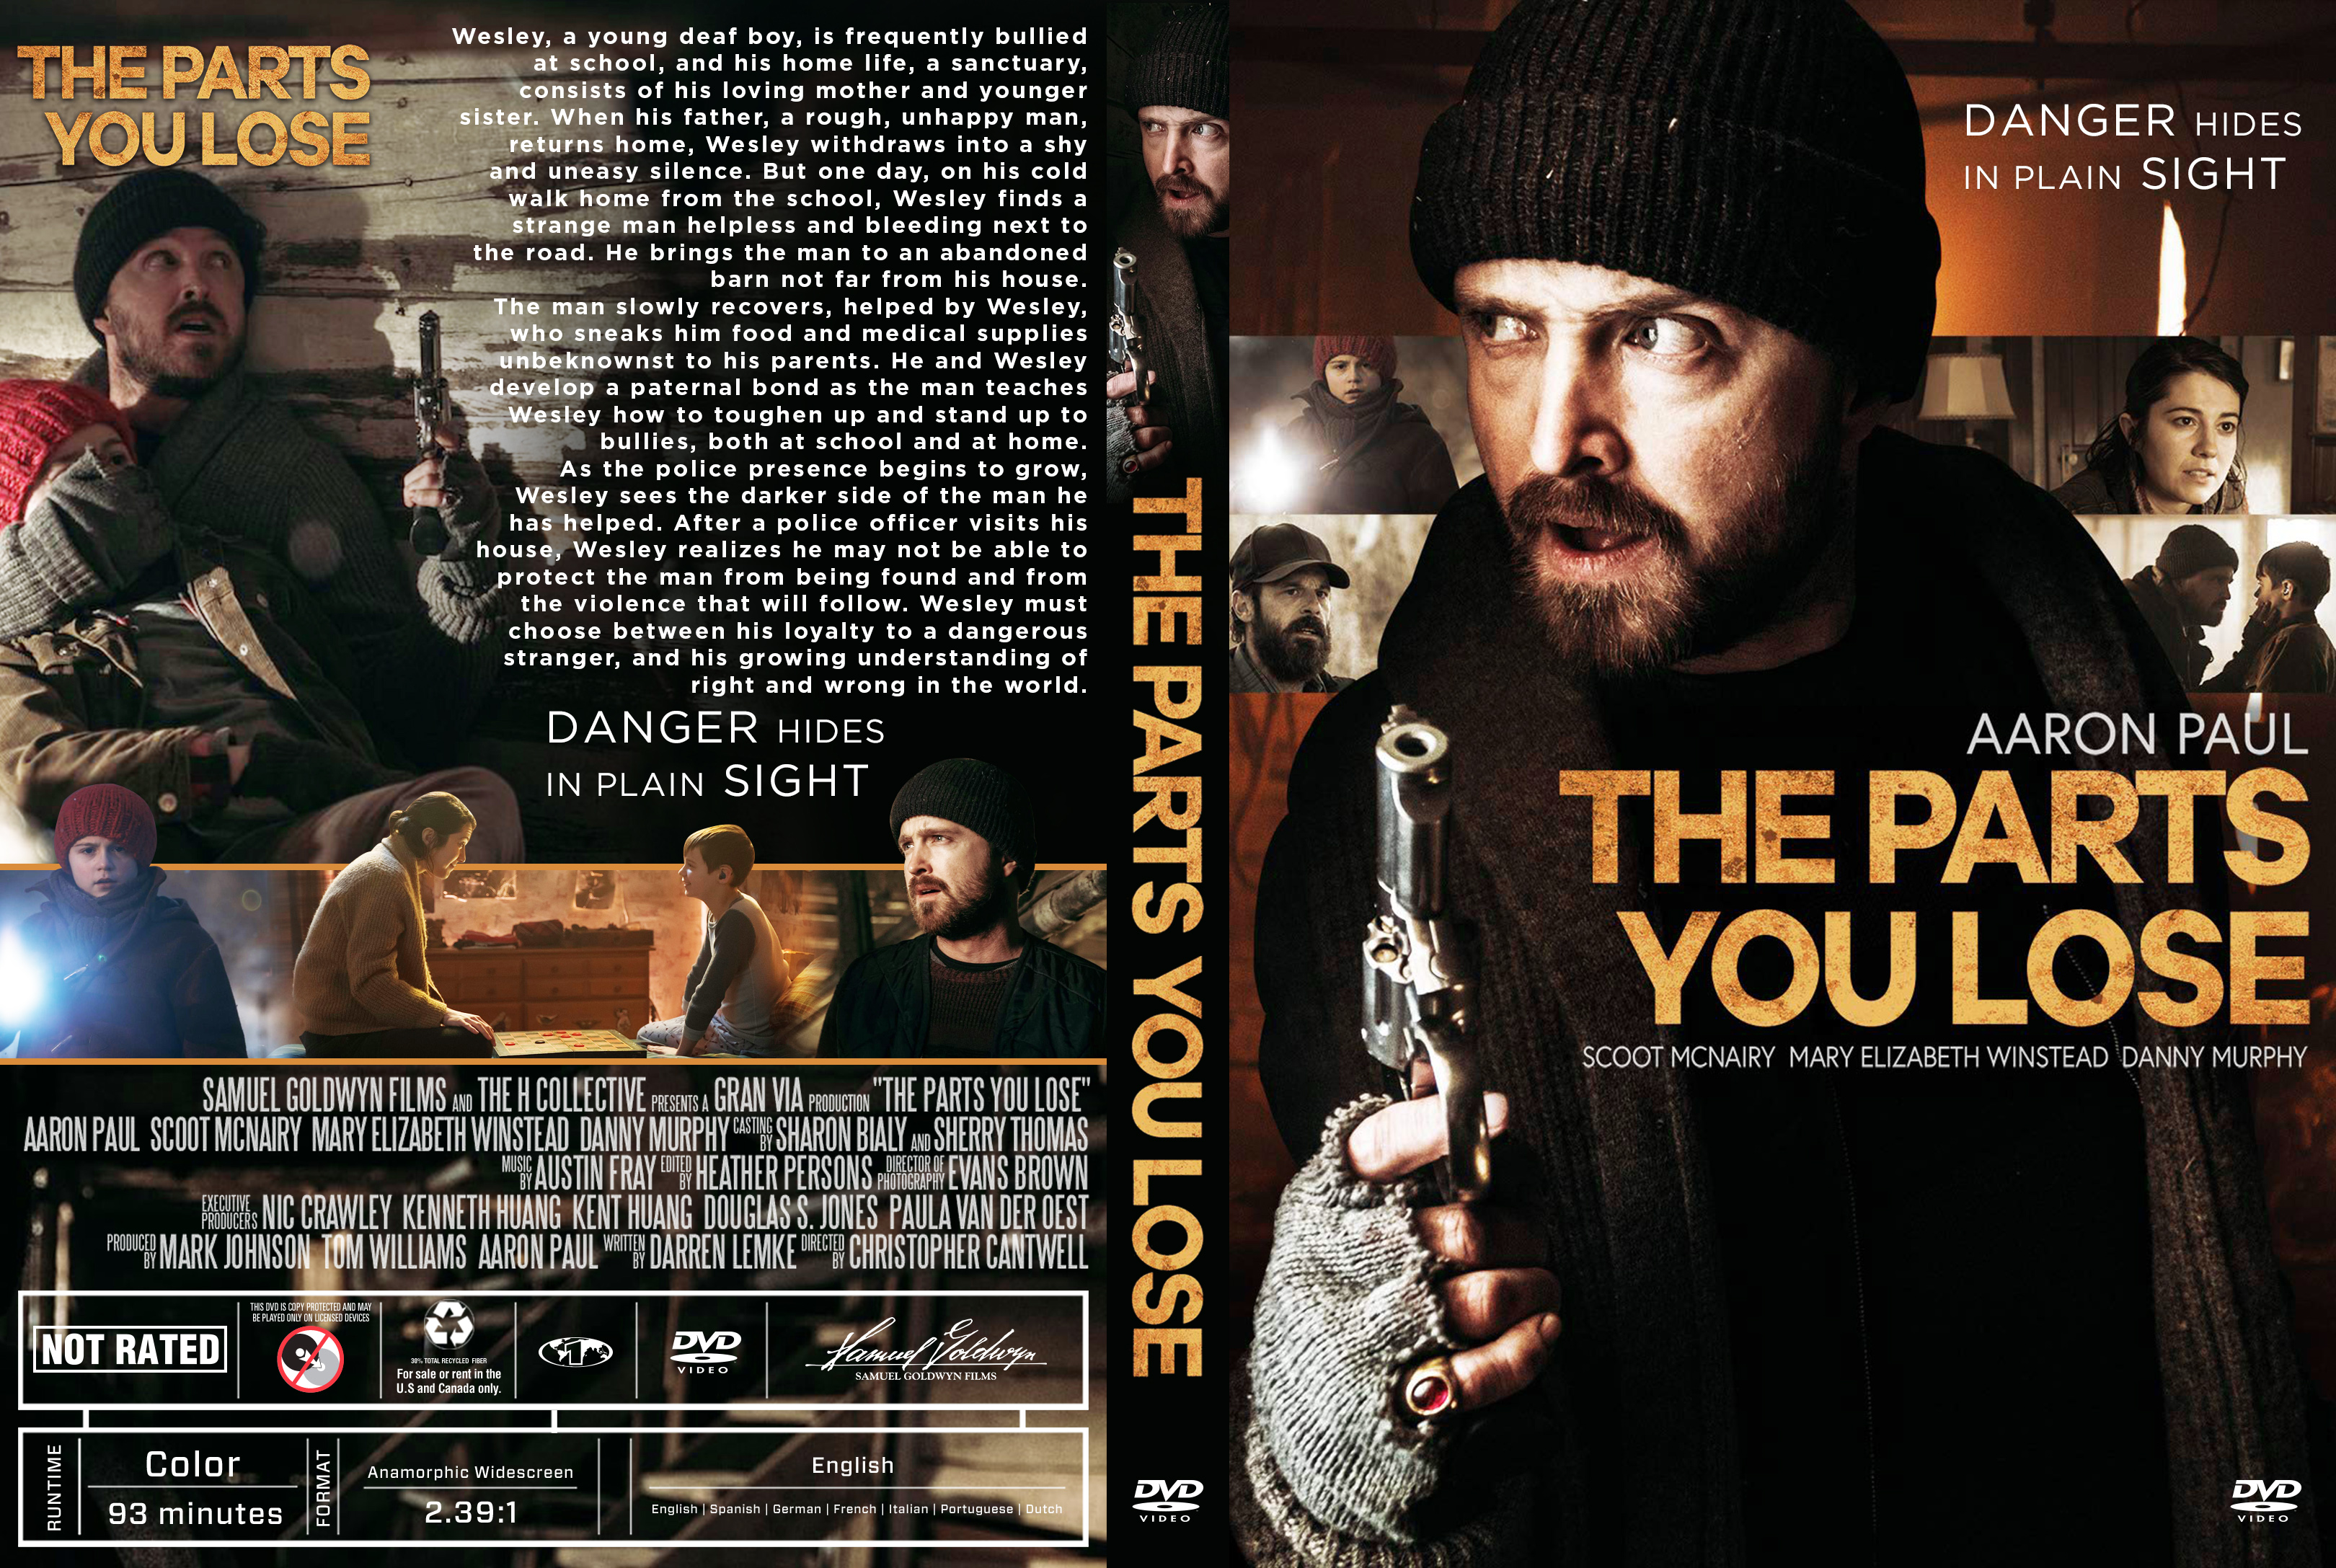 The Parts You Lose DVD Cover